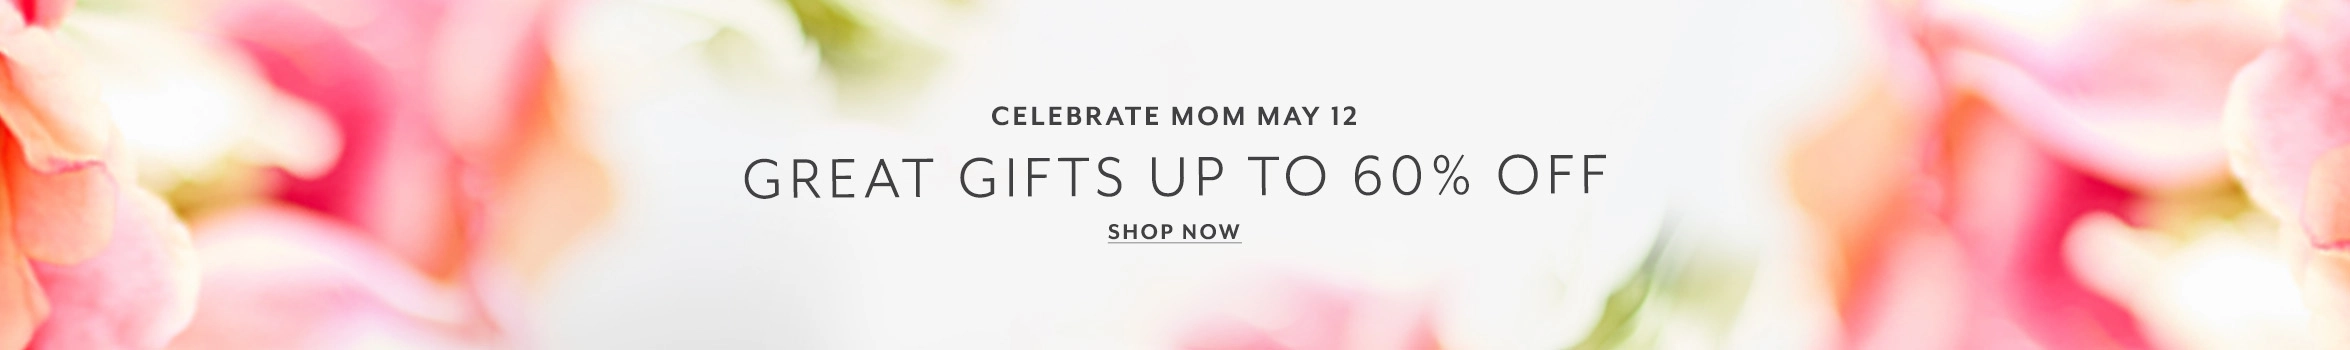 Celebrate Mom May 12, great gifts up to 60% off. Shop now.